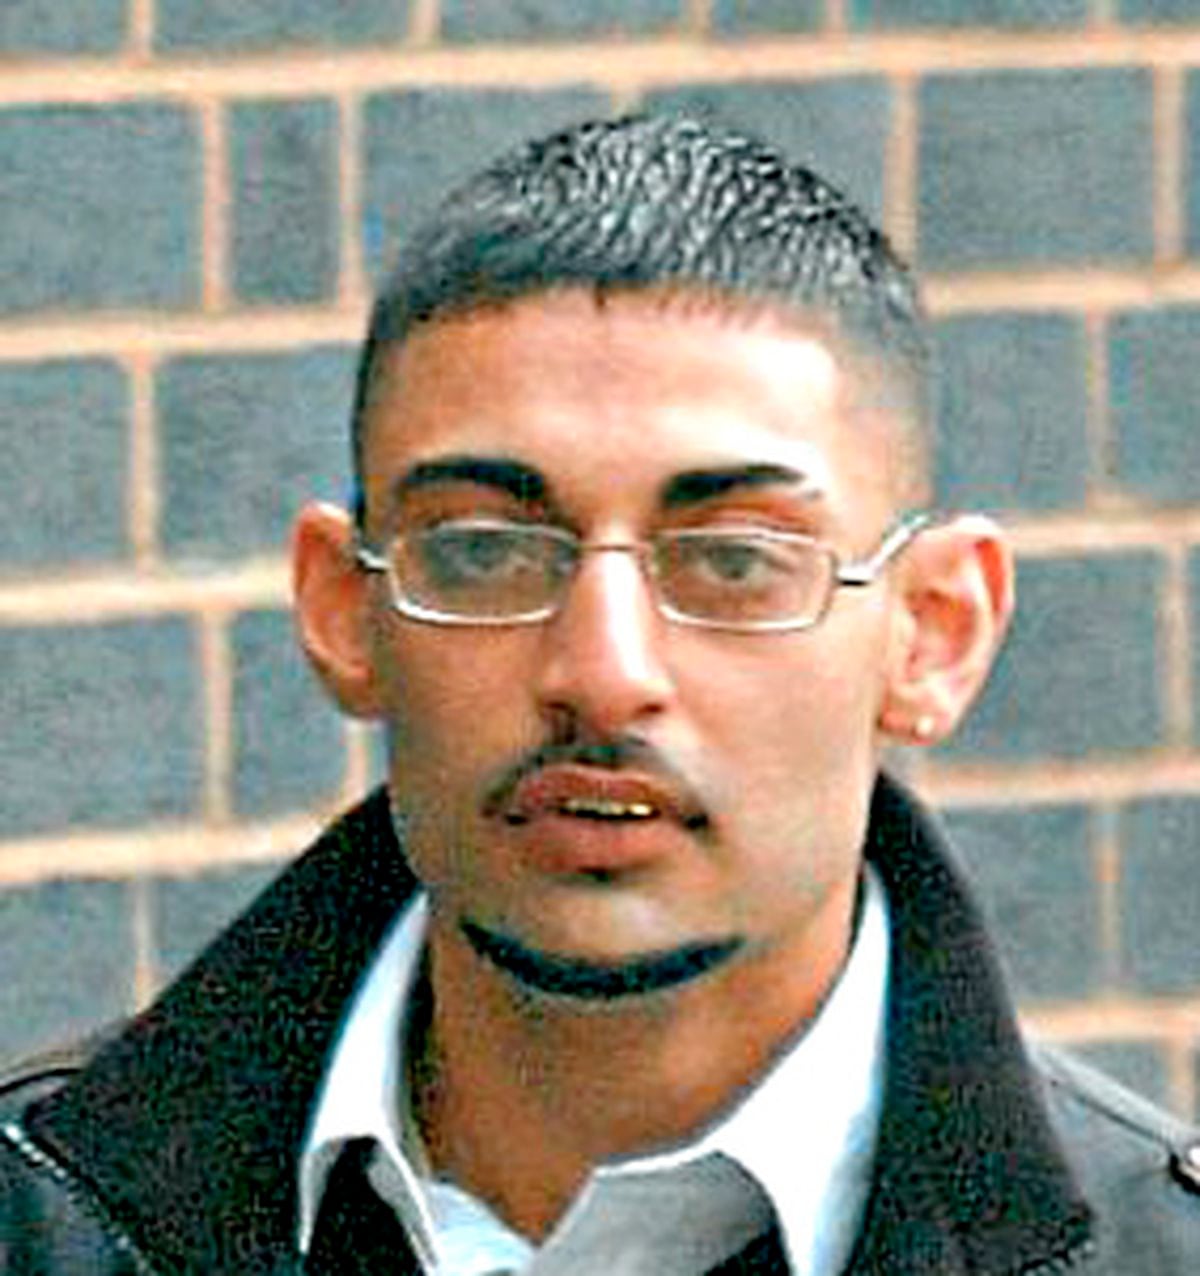 Telford Sex Gang Leader Needs 40 Stitches After Prison